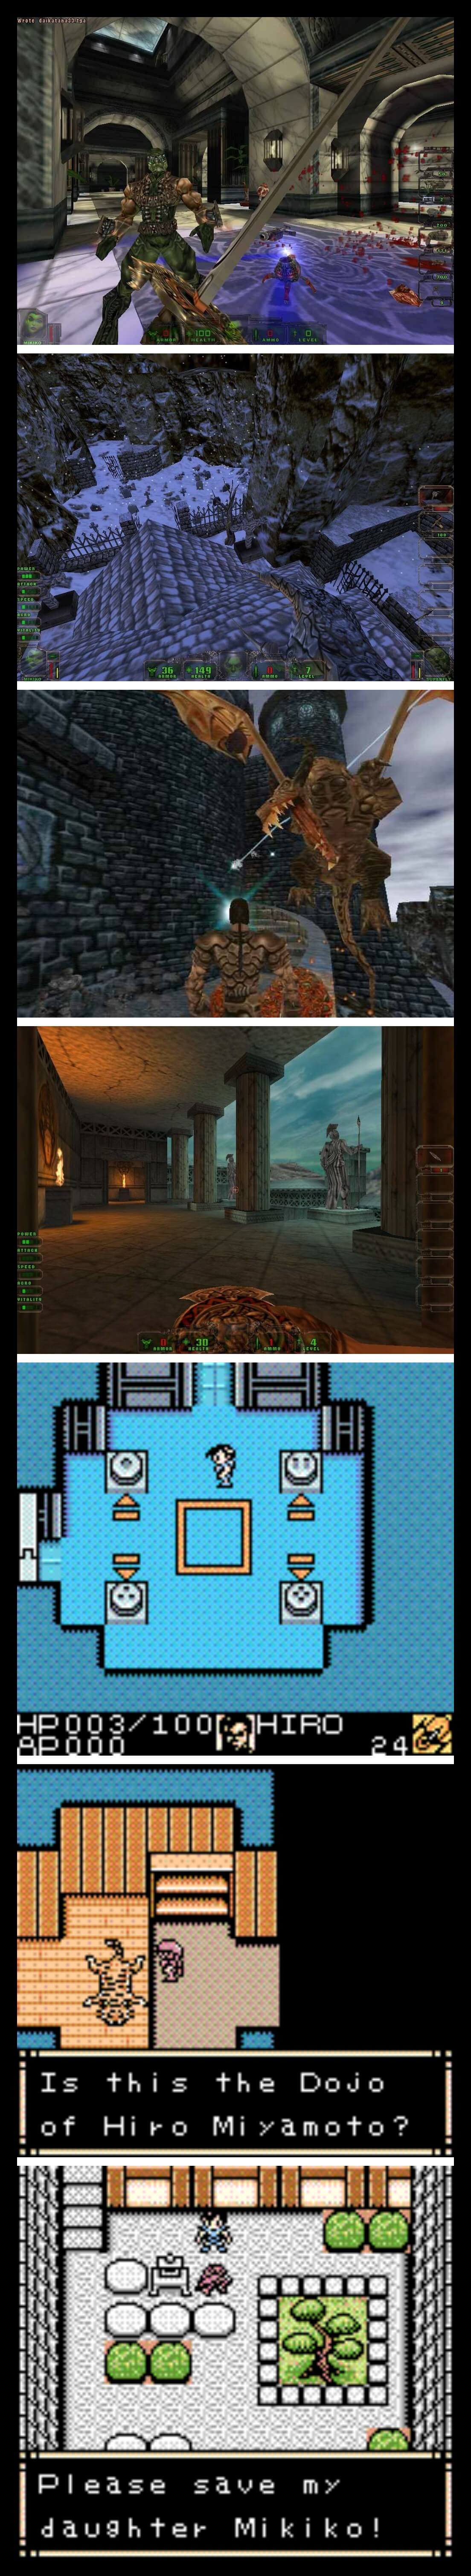 Image For Post | **Development**  
Daikatana was in development for 3 years, exactly. The reason for the long development cycle was the switch to the Quake II engine. Romero decided to switch because of its colored lighting, among other graphical goodies, but when he finally received the source code, it was nothing like he pictured. Overall the story of the game's development and Ion Storm in general is as epic and profound as anything in the game. 

The game was built using the original Quake game engine; according to an early interview, Romero planned Daikatana to have unique weapon sets and 16 monsters per time period. The core concept was to do something different with shooter mechanics several times within the same game.[6] Romero created the basic storyline, and named its protagonist Hiro Miyamoto in honour of Japanese game designer Shigeru Miyamoto. The title is written in Japanese kanji, translating roughly to "big sword". The name comes from an item in a Dungeons &amp;amp; Dragons campaign played by the original members of id Software, which Romero co-founded.

During this early period, the team consisted of fifteen people. The music was composed by a team which included Will Loconto. However, during its earlier production, the team saw the Quake II engine and decided to incorporate its code. This resulted in many delays when finalising the engine. The problems with programming the new engine contributed to the game being delayed from its projected 1998 release date.[5] Romero stated prior to release that he would have chosen the Quake II engine to develop the game from the start if given the chance.

Romero later ascribed some problems triggered in using the technology as being due to the rivalry manufactured by the company's marketing between them and id Software. Due to the delays, development of the game ran parallel to Anachronox, Dominion: Storm Over Gift 3, and eventually Deus Ex.

Something that further impacted production was the departure of around twenty staff members from the team, who either left Ion Storm or transferred to the Austin studio. In 1998, lead artist Bryan Pritchard left the company and was replaced by Eric Smith. According to staff member Chrstian Divine, the growing negative press surrounding the company had a further detrimental effect on development. Some of the backlash eventually led to his own departure for Ion Storm's Austin studio to work on Deus Ex.

The most notorious incident was the public resignation of nine core team members at once, something Romero understood given the low team morale but felt it as a betrayal of trust. The departures led to the hiring of Stevie Case as level designer and Chris Perna to polish and add to character models. In a 1999 interview, Romero attributed the slowing of development during that period to the staff departures, but said that most of the level design and the entire score had been completed before that. Problems reached the point that Eidos publishing director John Kavanagh was sent down to sort out problems surrounding it production.

In a later interview, Romero admitted there were many faults with the game at release, blaming the development culture and management clashes at Ion Storm, in addition to staff departures causing much of the work to be scrapped and begun over again. Divine attributed the problems to a combination of overly carefree atmosphere, and corporate struggles about company ownership interfering with game production. Only two staff members remained on the game for the entirety of its production.